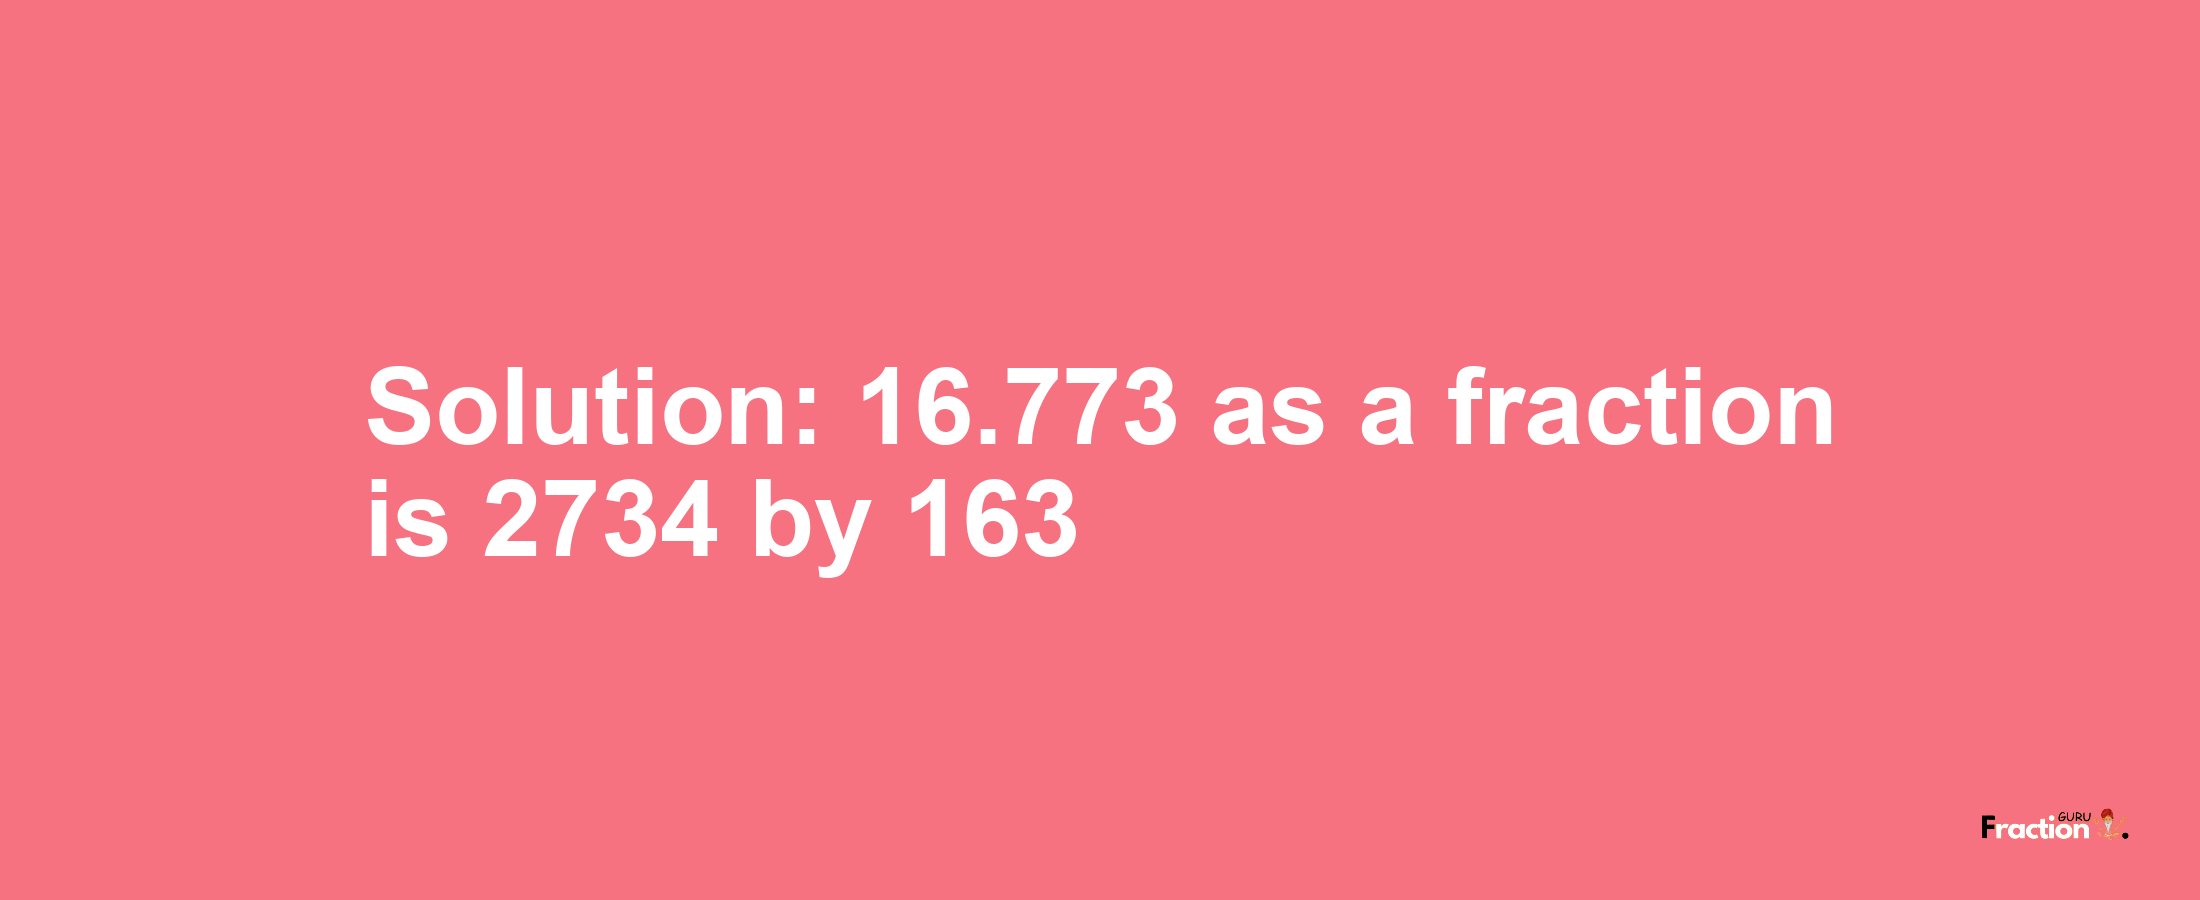 Solution:16.773 as a fraction is 2734/163